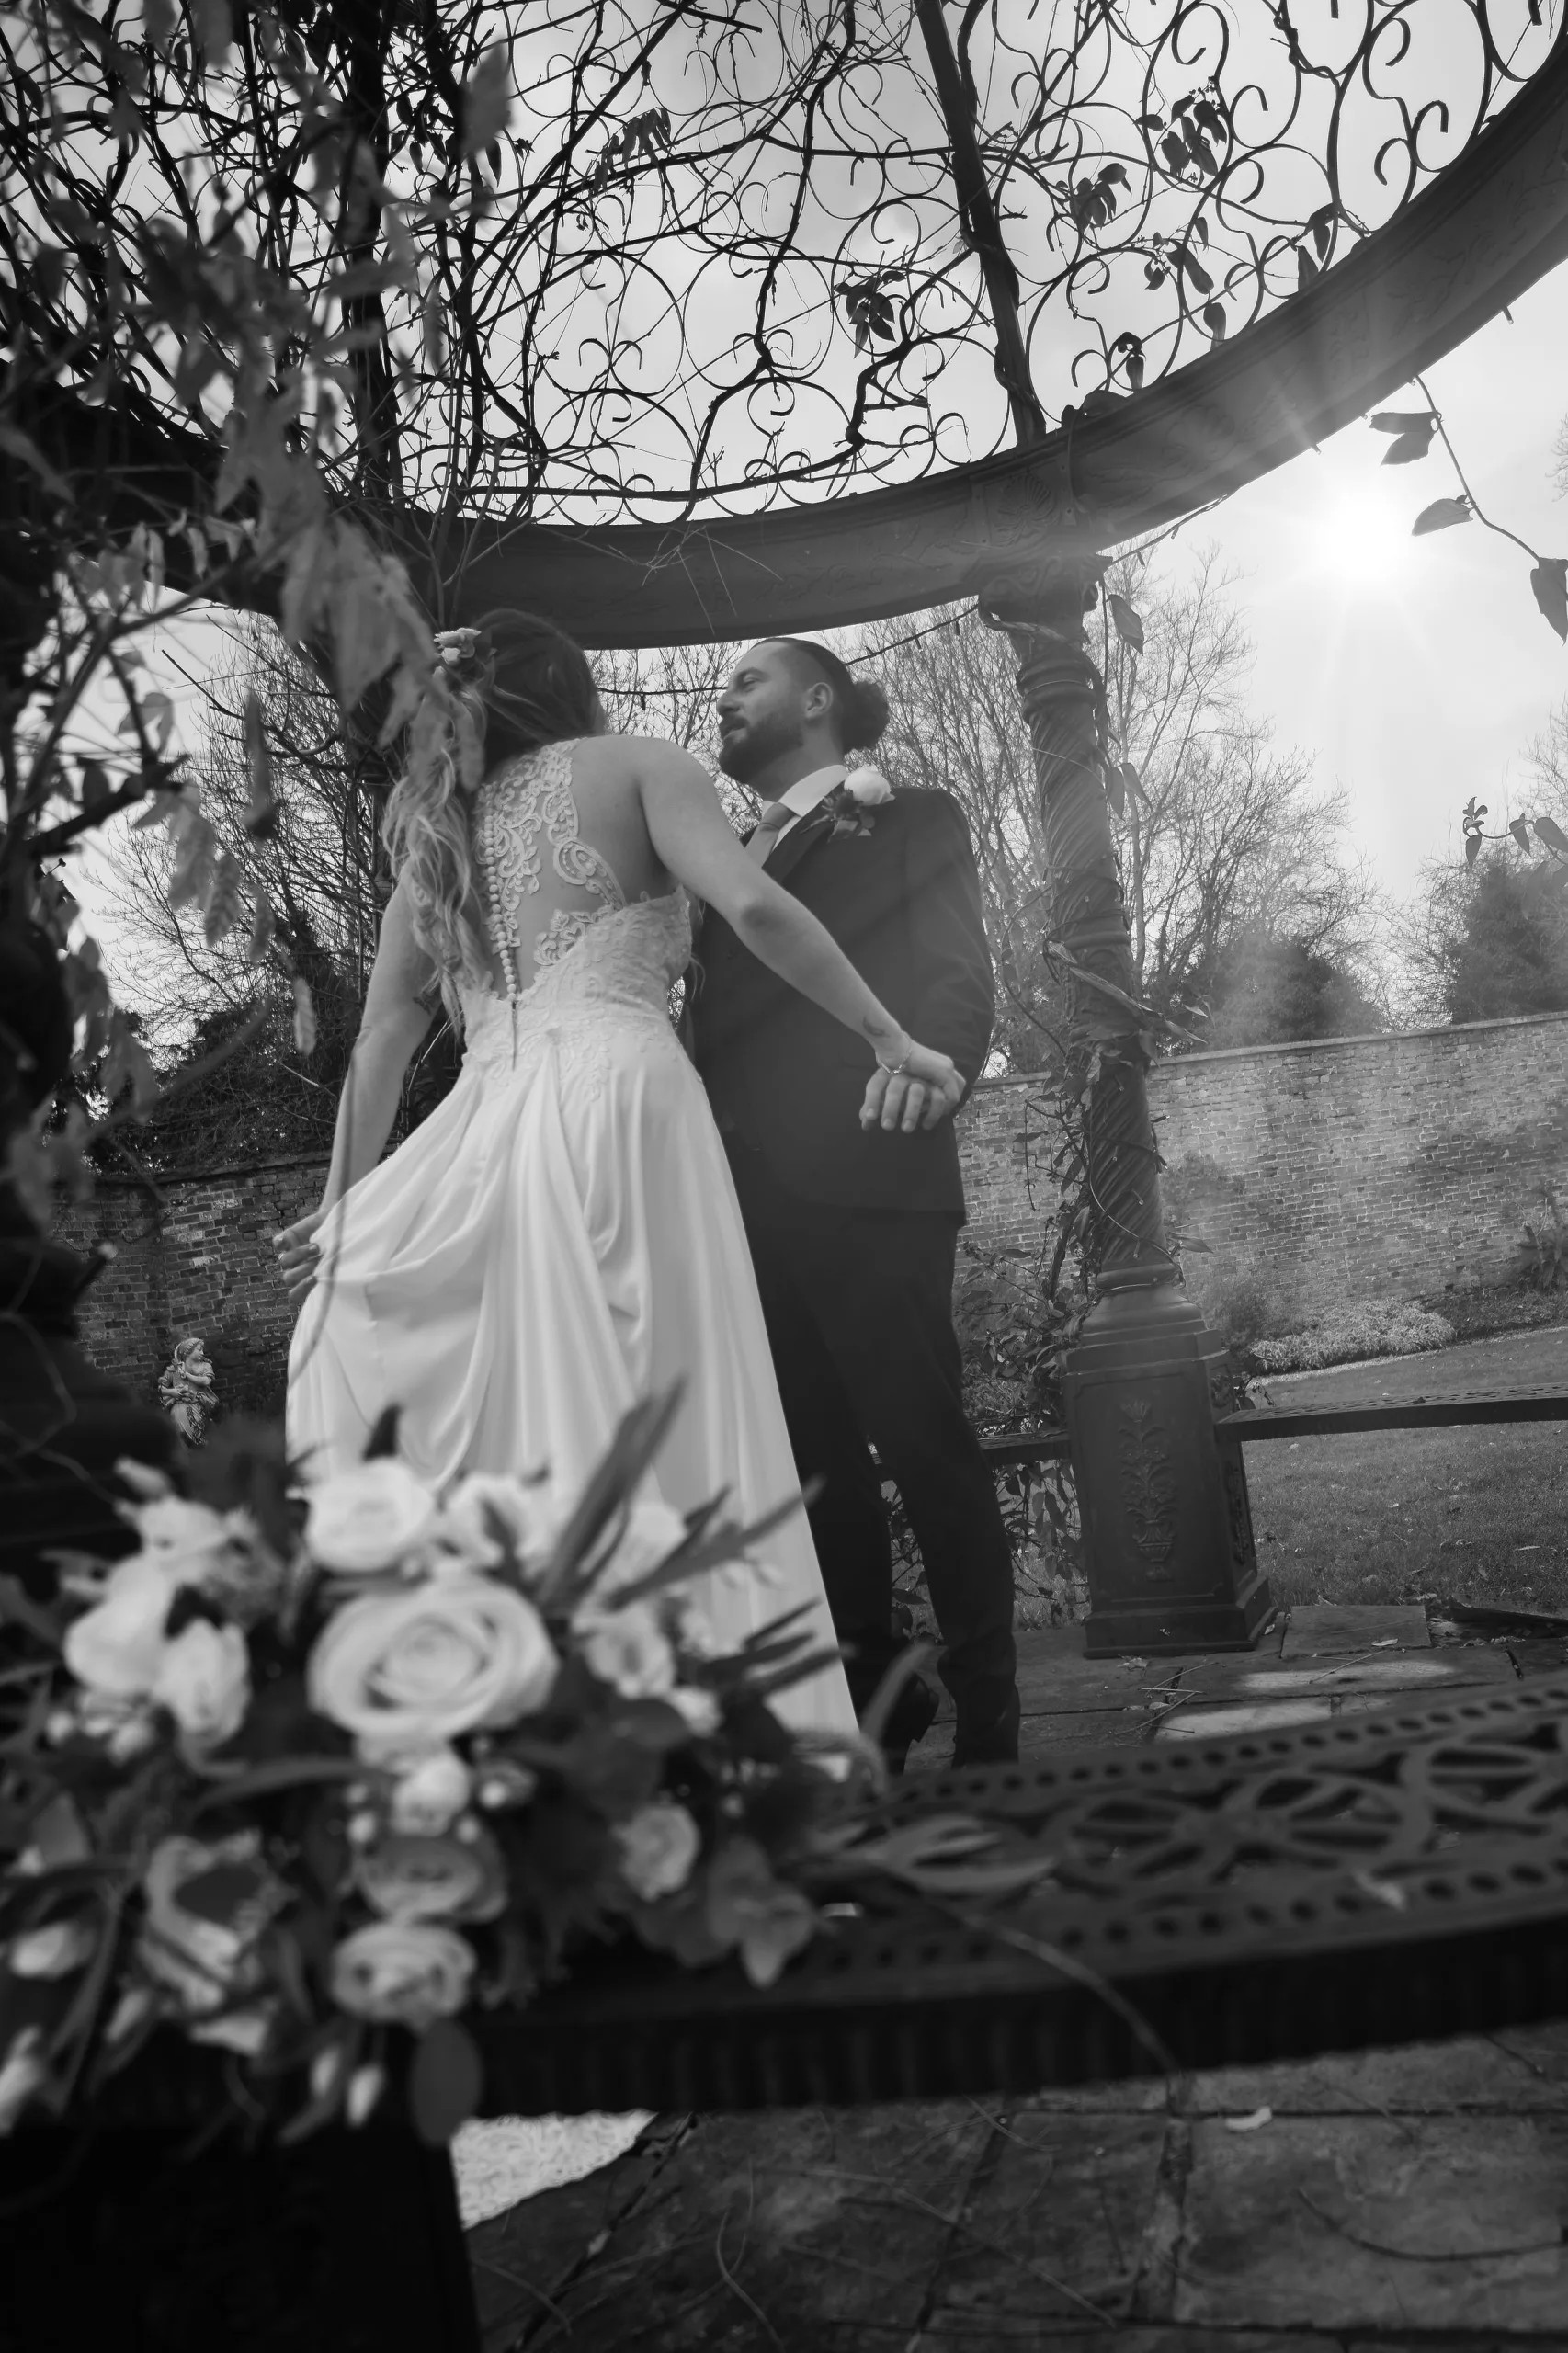 Bride and Groom Taken by Orchardleigh Wedding Photographer